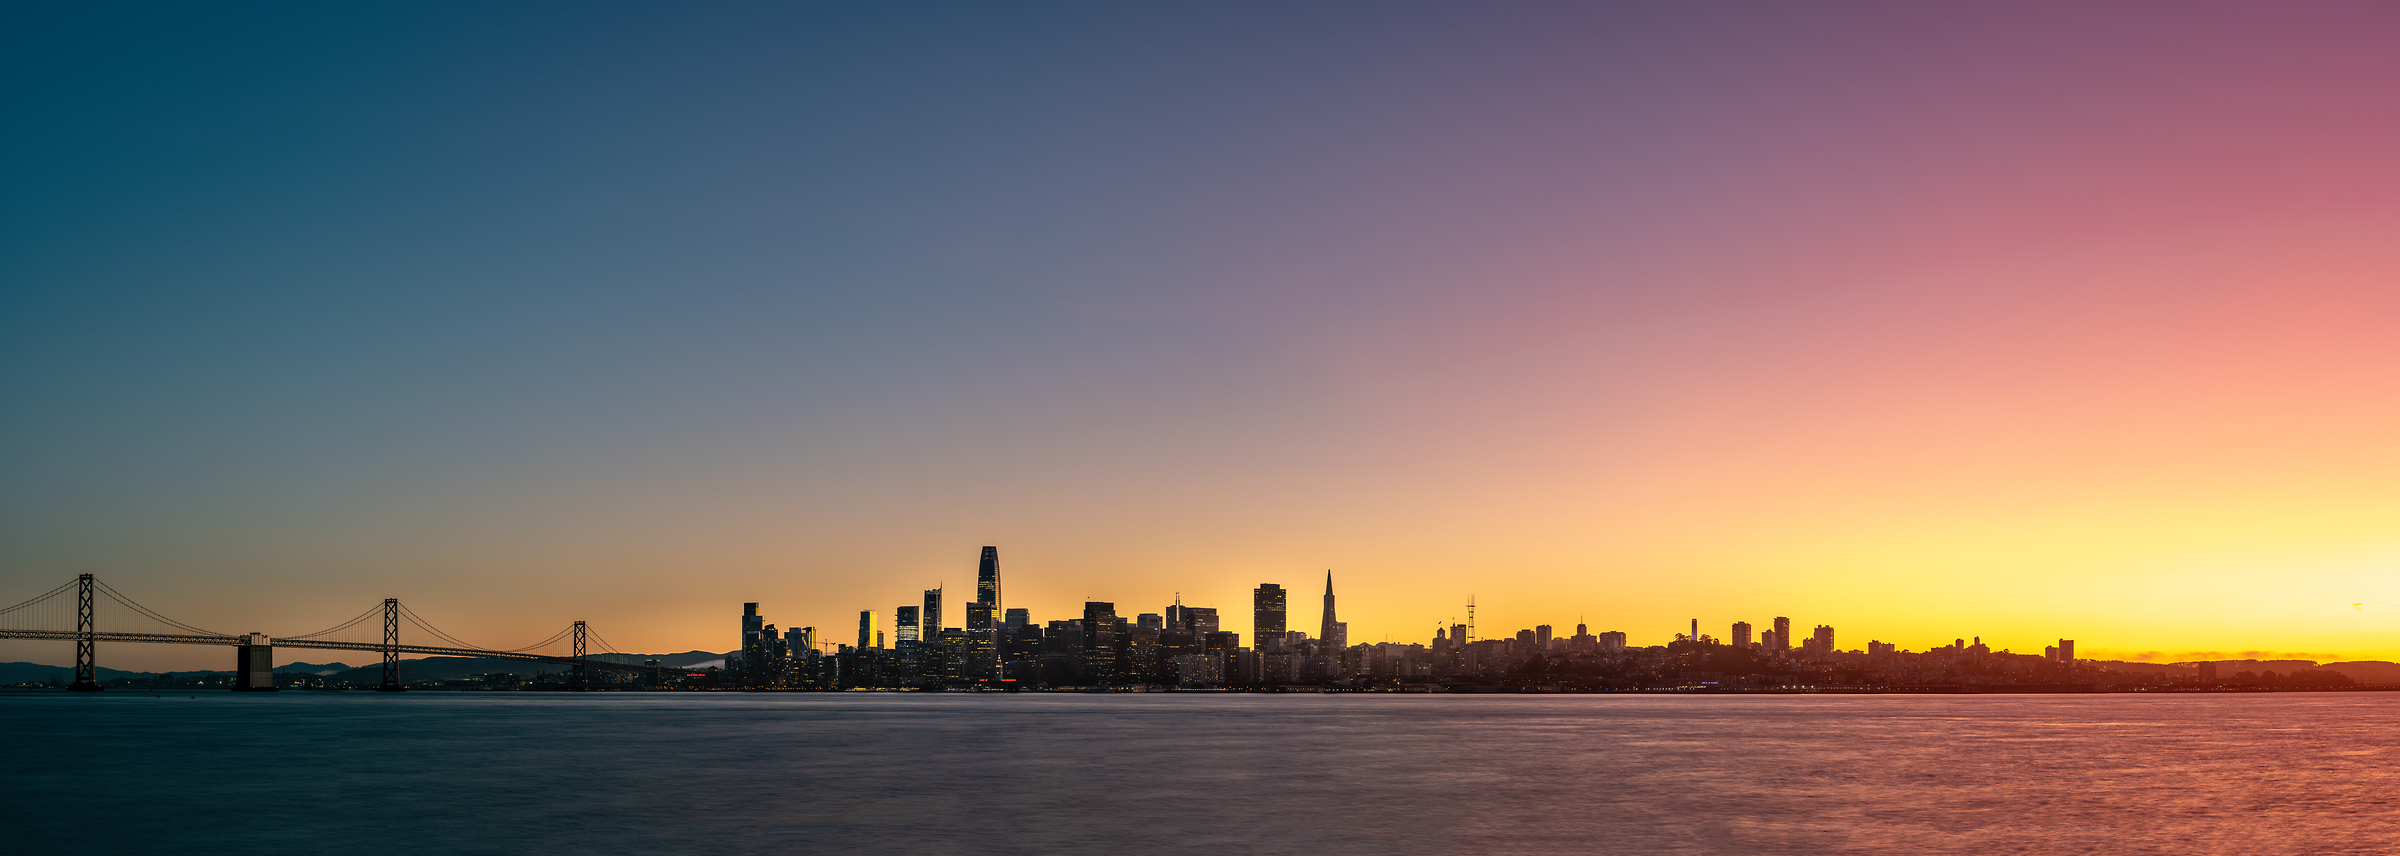 310 megapixels! A very high resolution, large-format VAST photo print of the San Francisco skyline at sunset; cityscape photograph created by Justin Katz in San Francisco, California